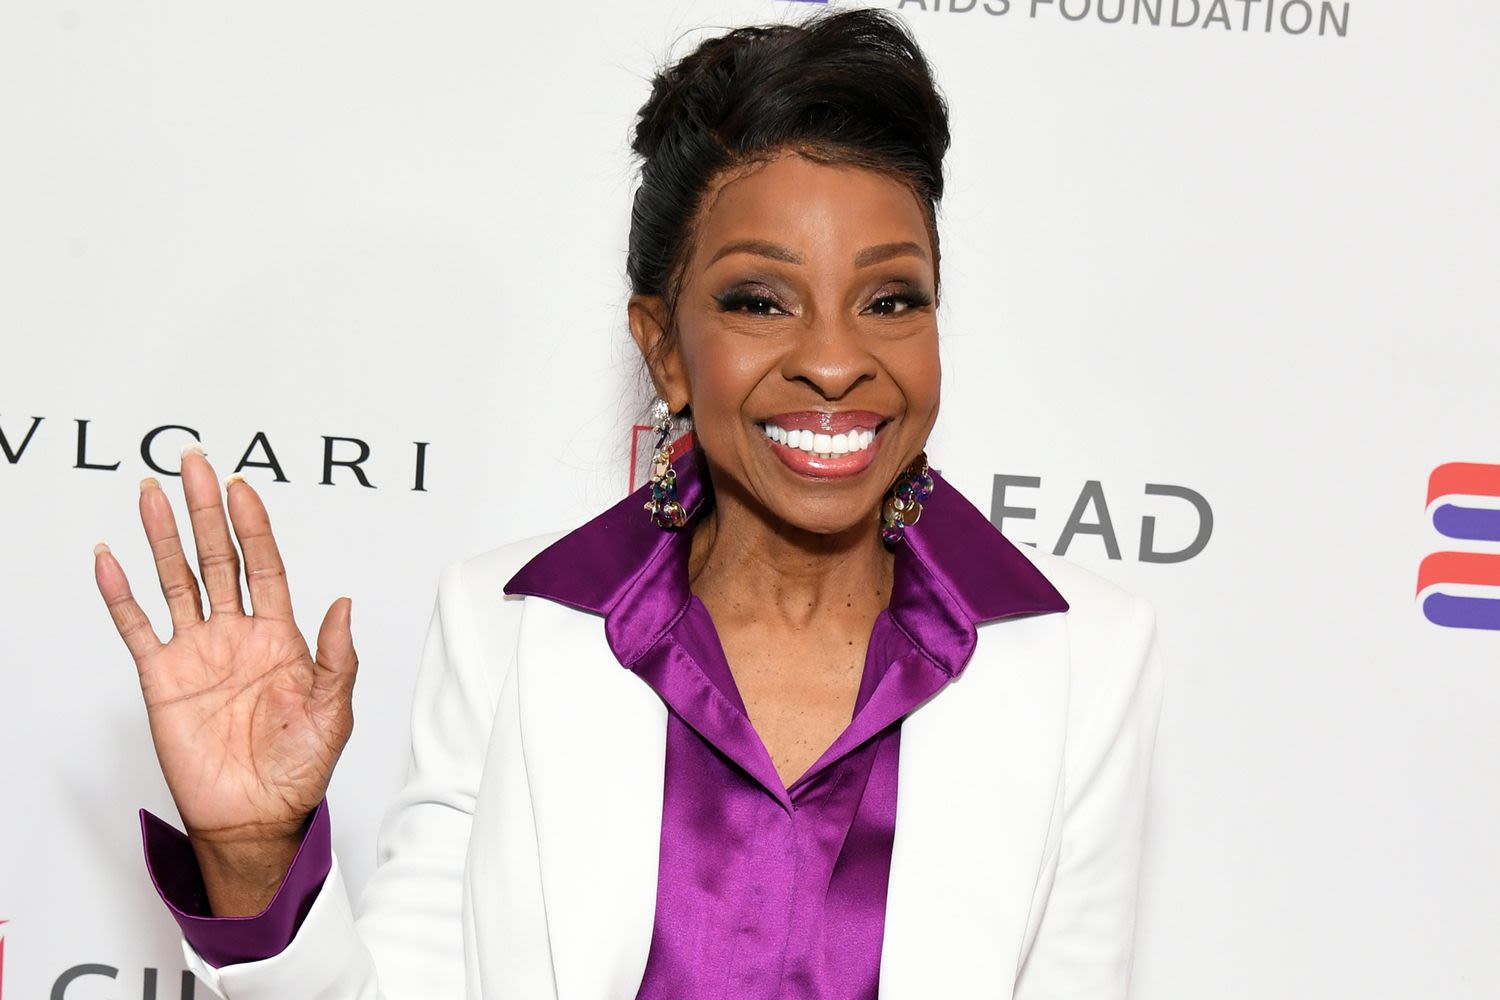 Gladys Knight Marks 80th Birthday with Sweet Note: 'I Am Honored to Live This Wonderful Life'